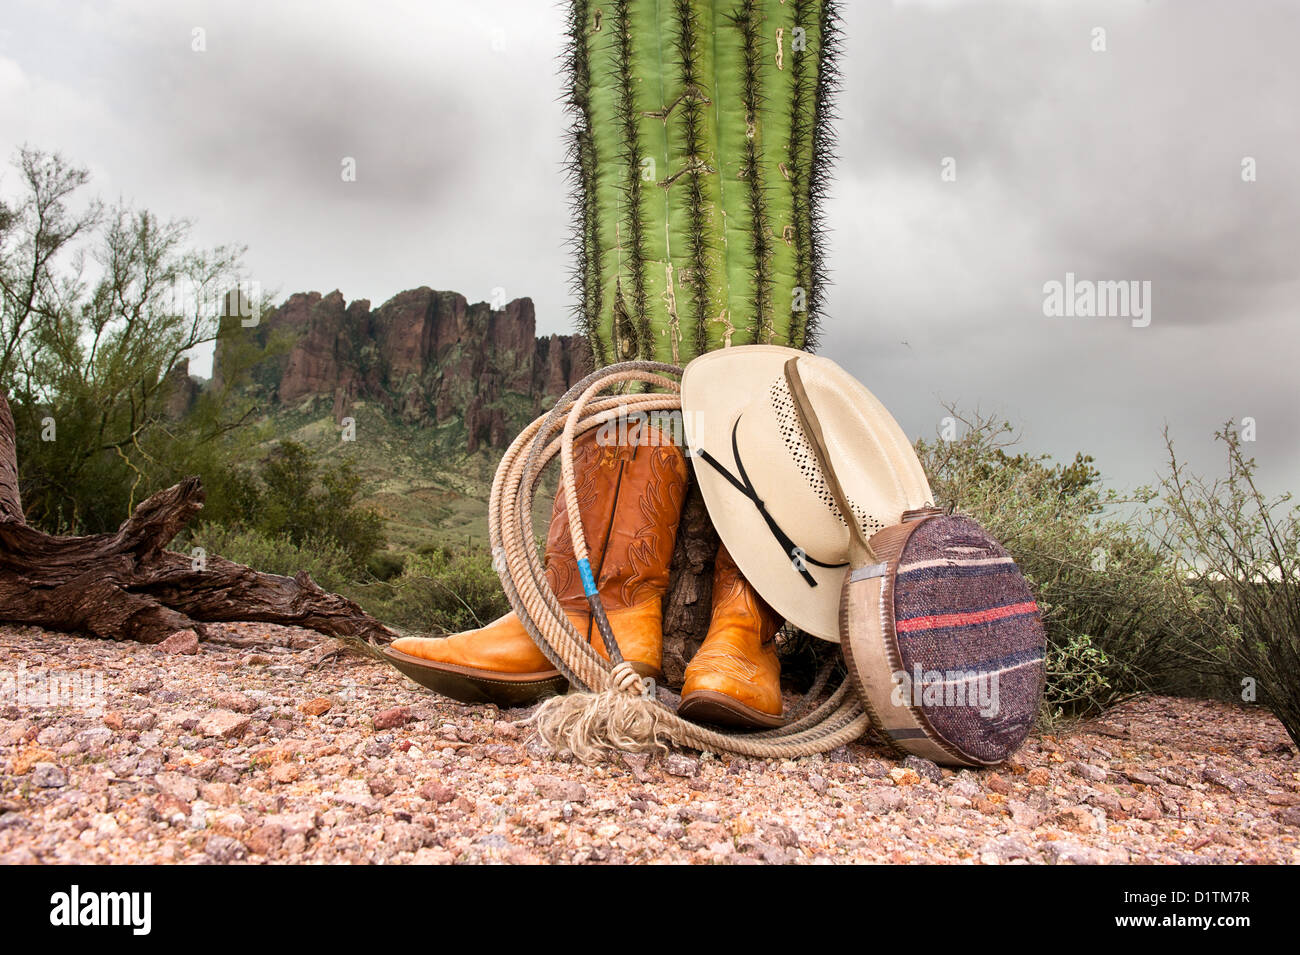 Cactus stock photography and images - Alamy